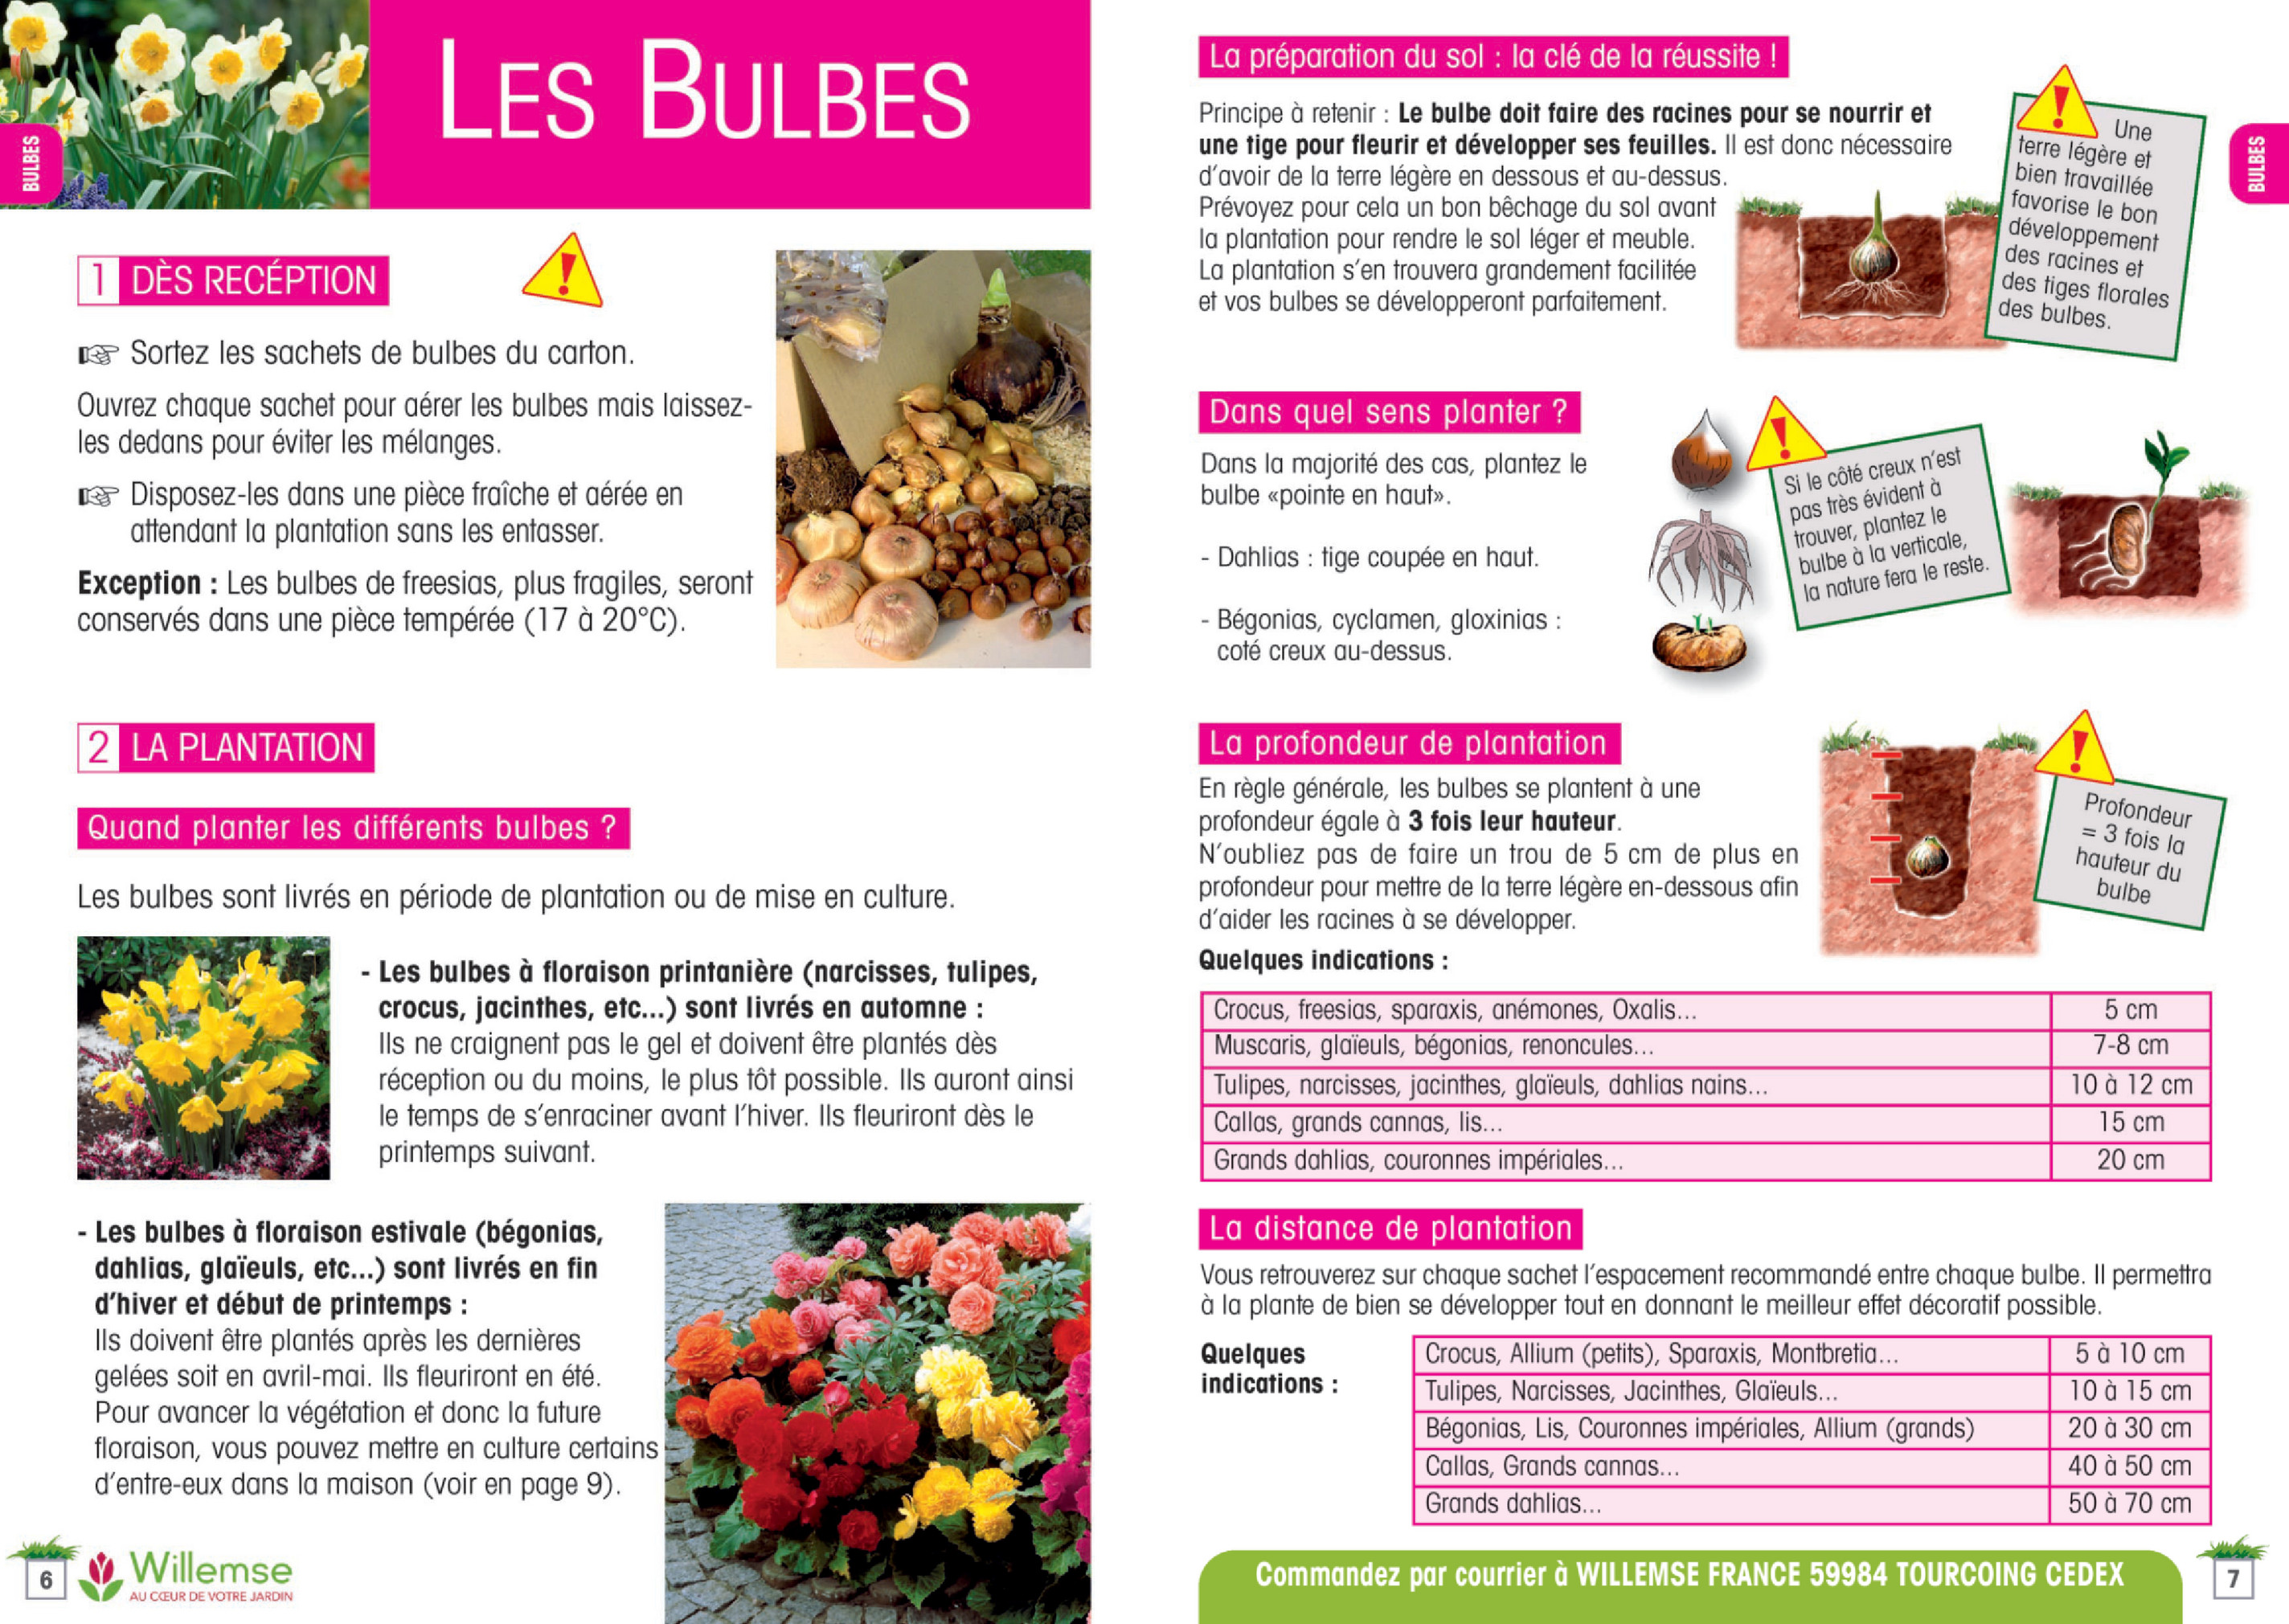 Willemse - Guide de jardinage Willemse - Page 19 - Created with Publitas.com